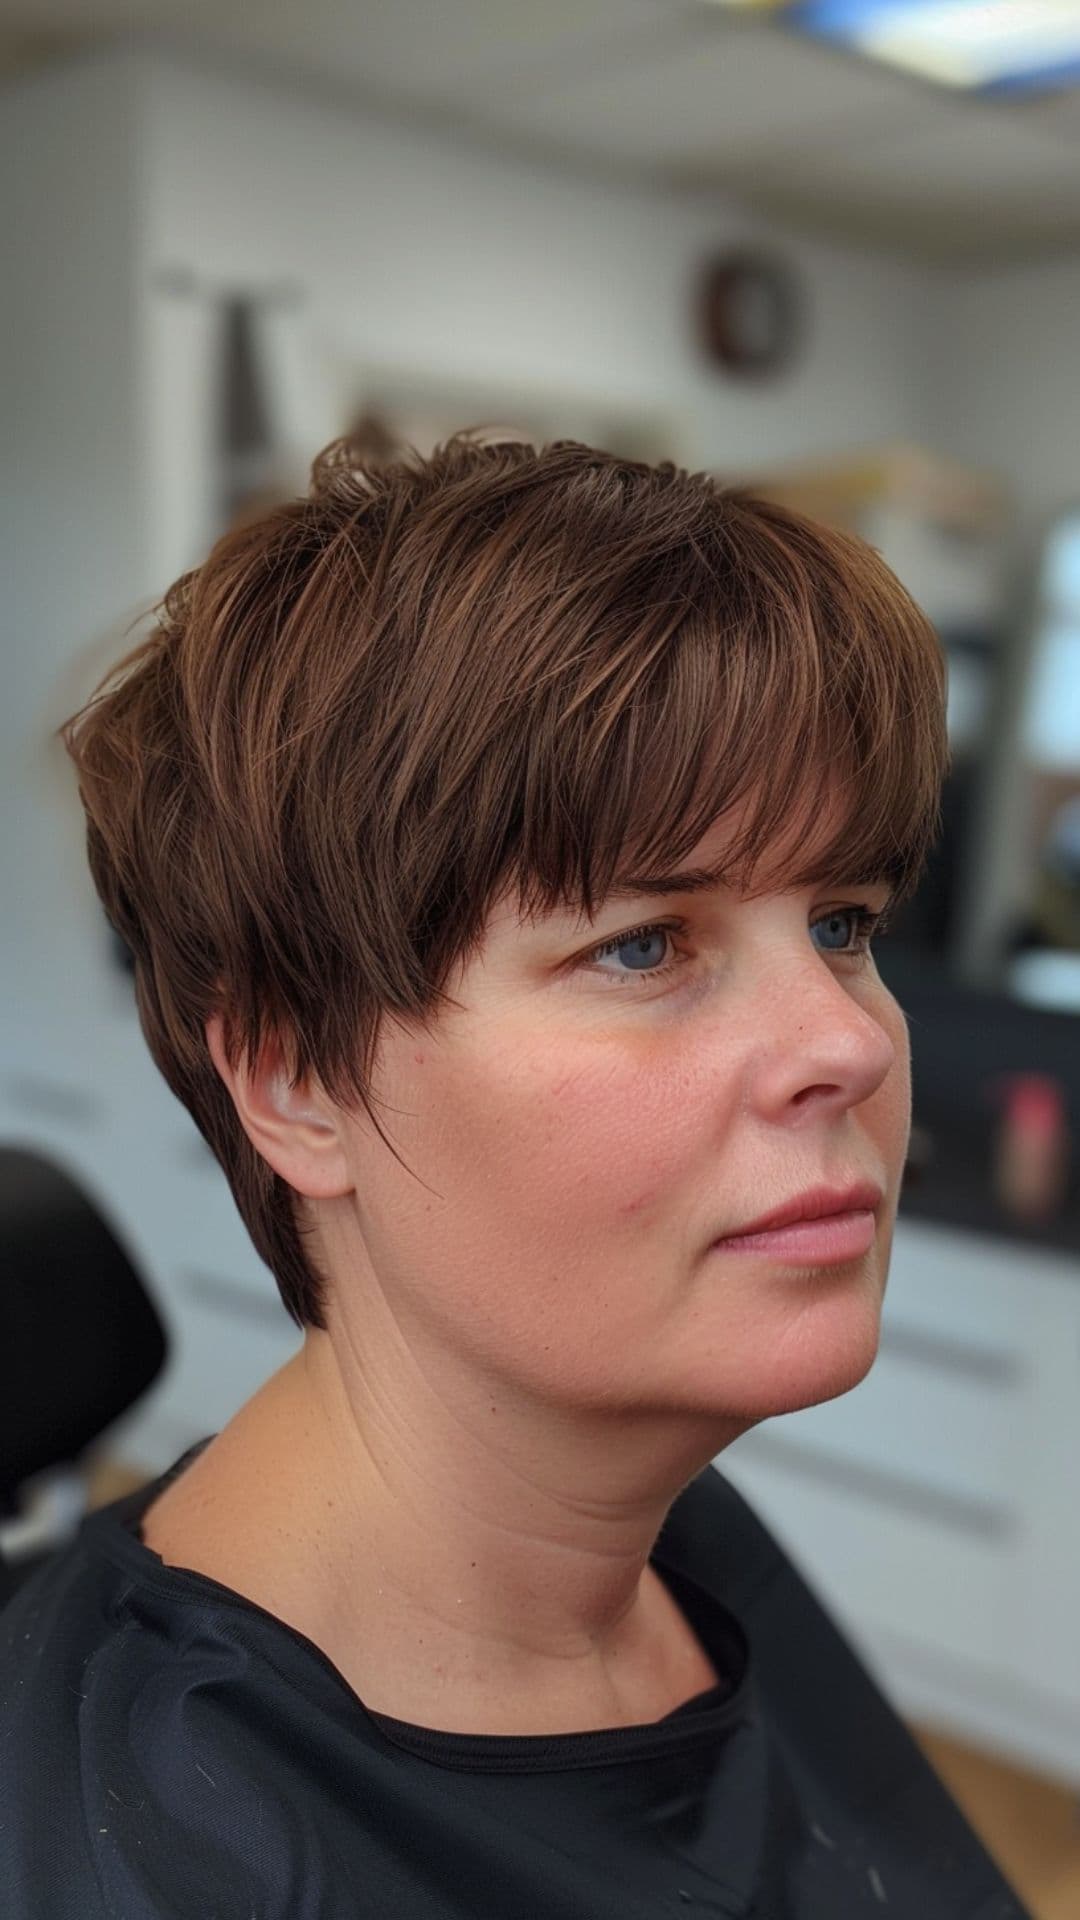 A woman modelling a pixie cut with volume on top.